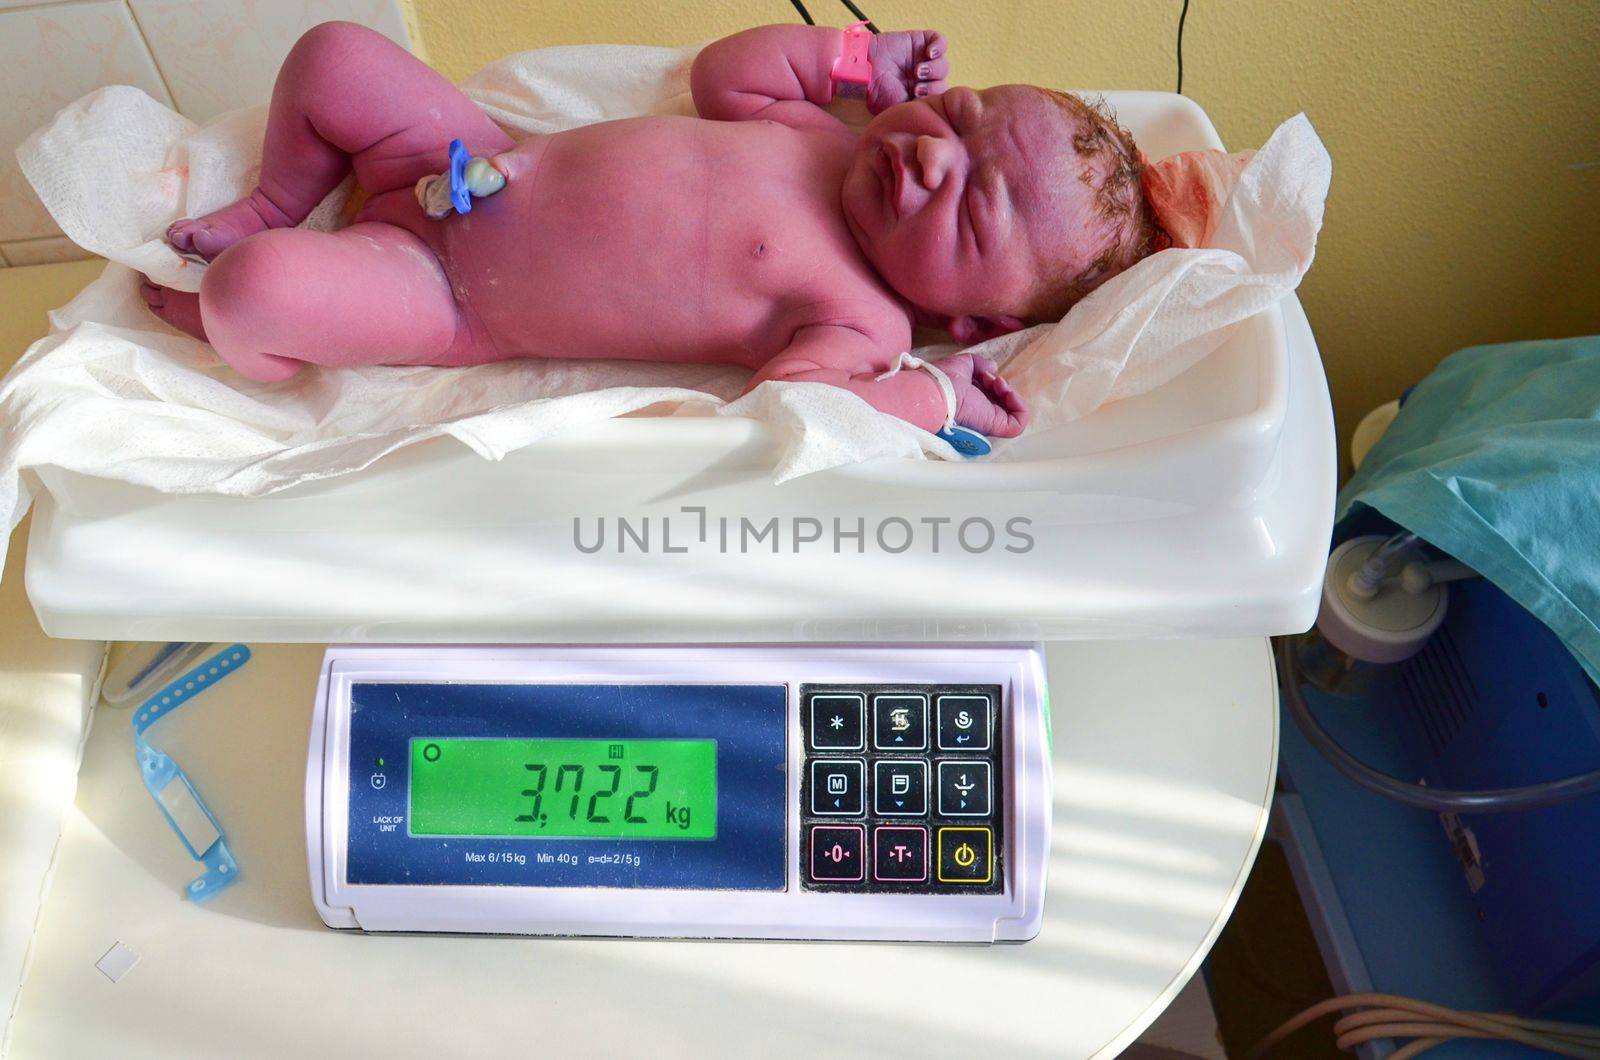 New born baby - girl with remainder of umbilical cord after successful childbirth. Real birthing and new born baby in a hospital. A healthy female newborn baby girl has been examined on the balance scale immediately after childbirth by roman_nerud